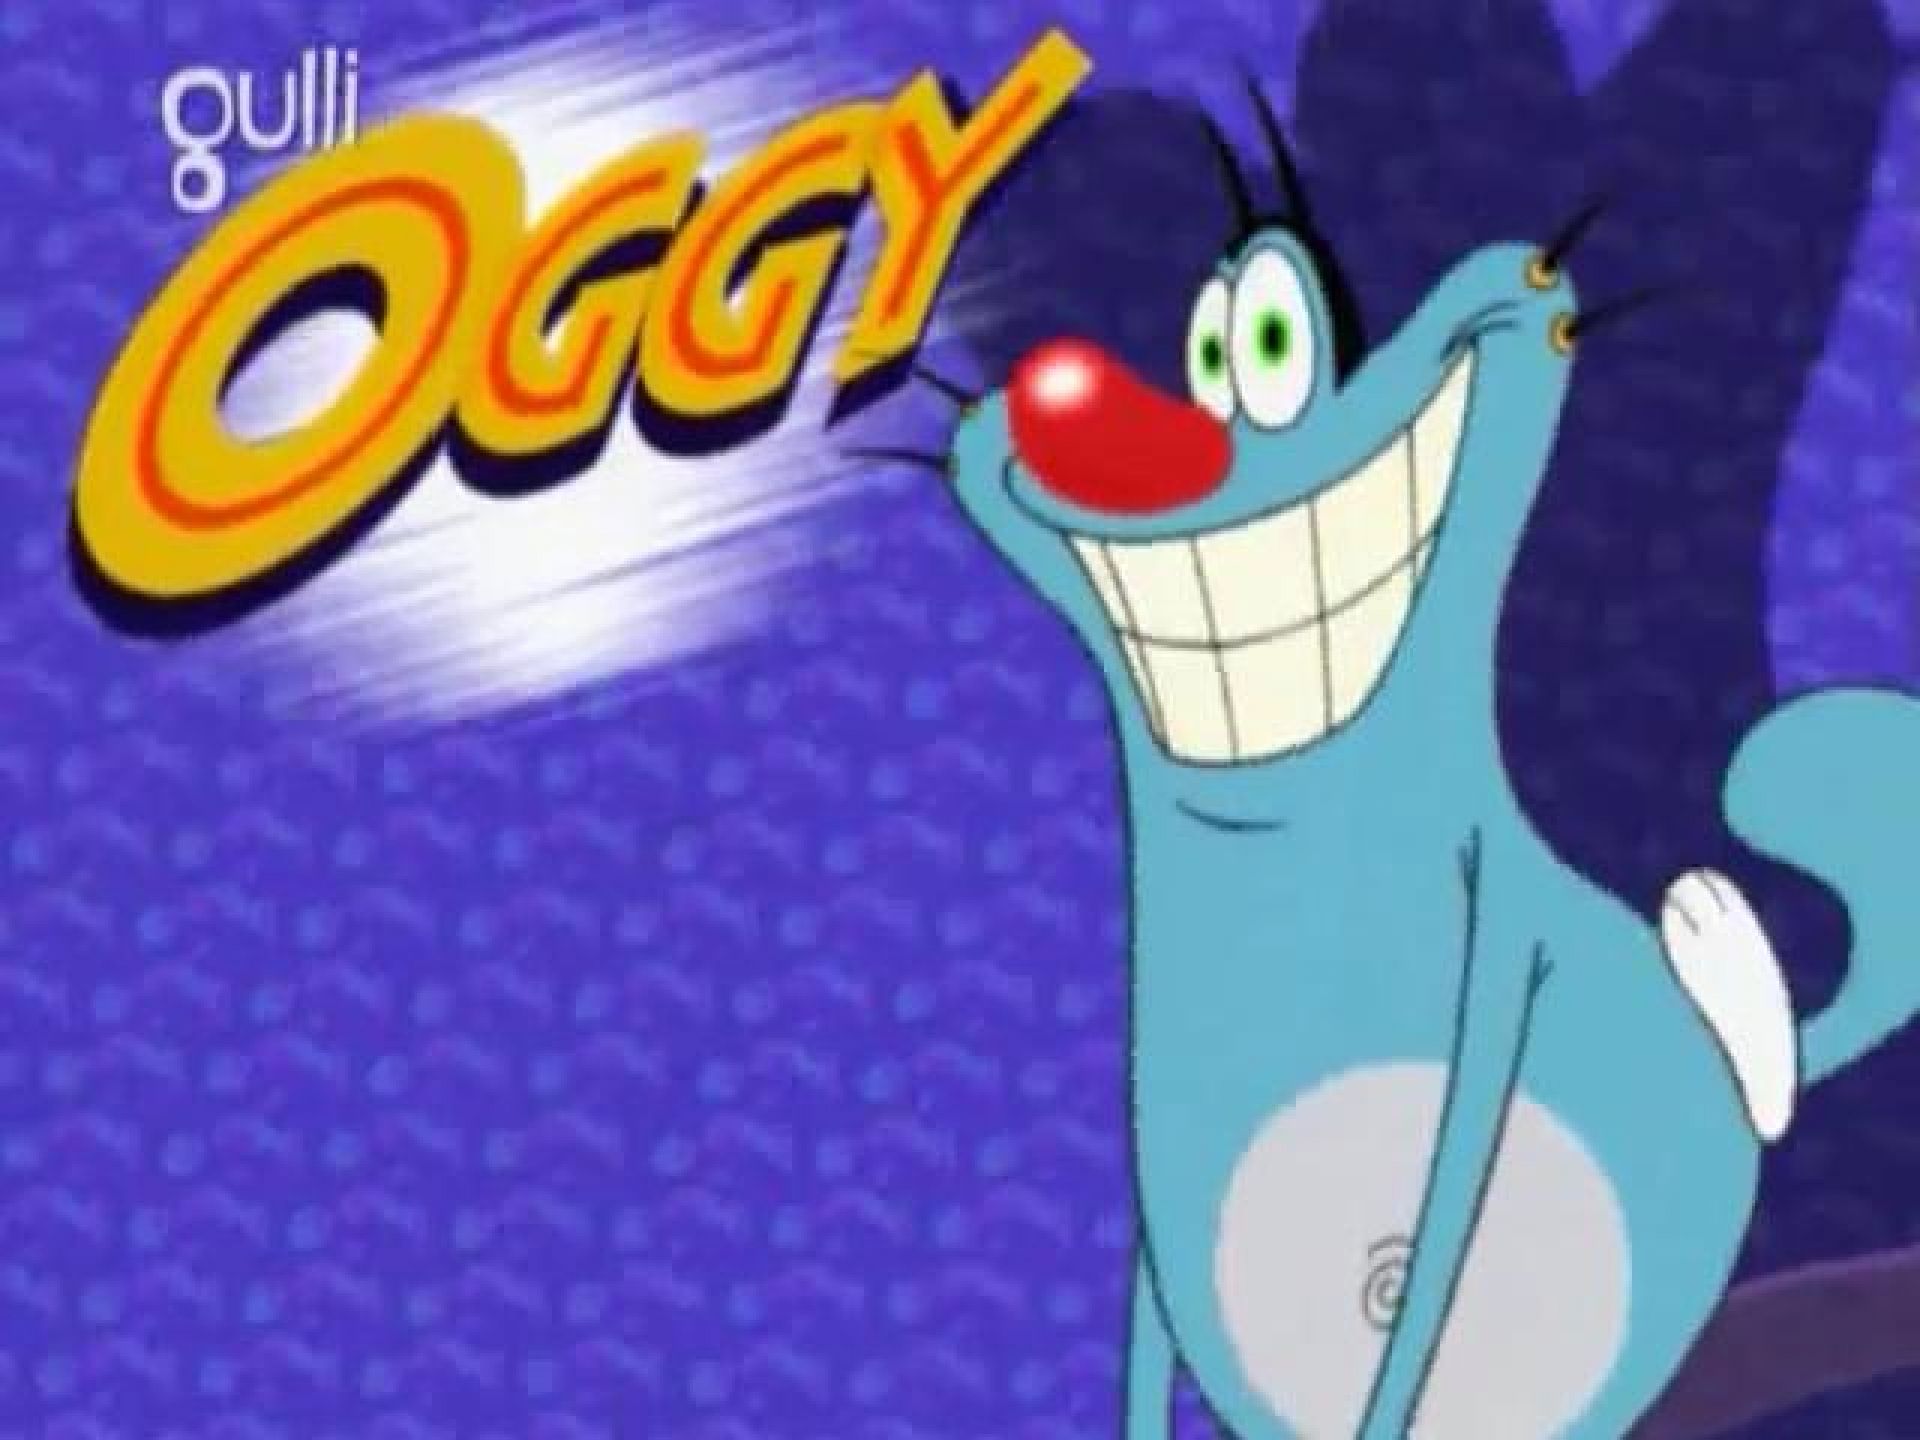 tom and jerry oggy games